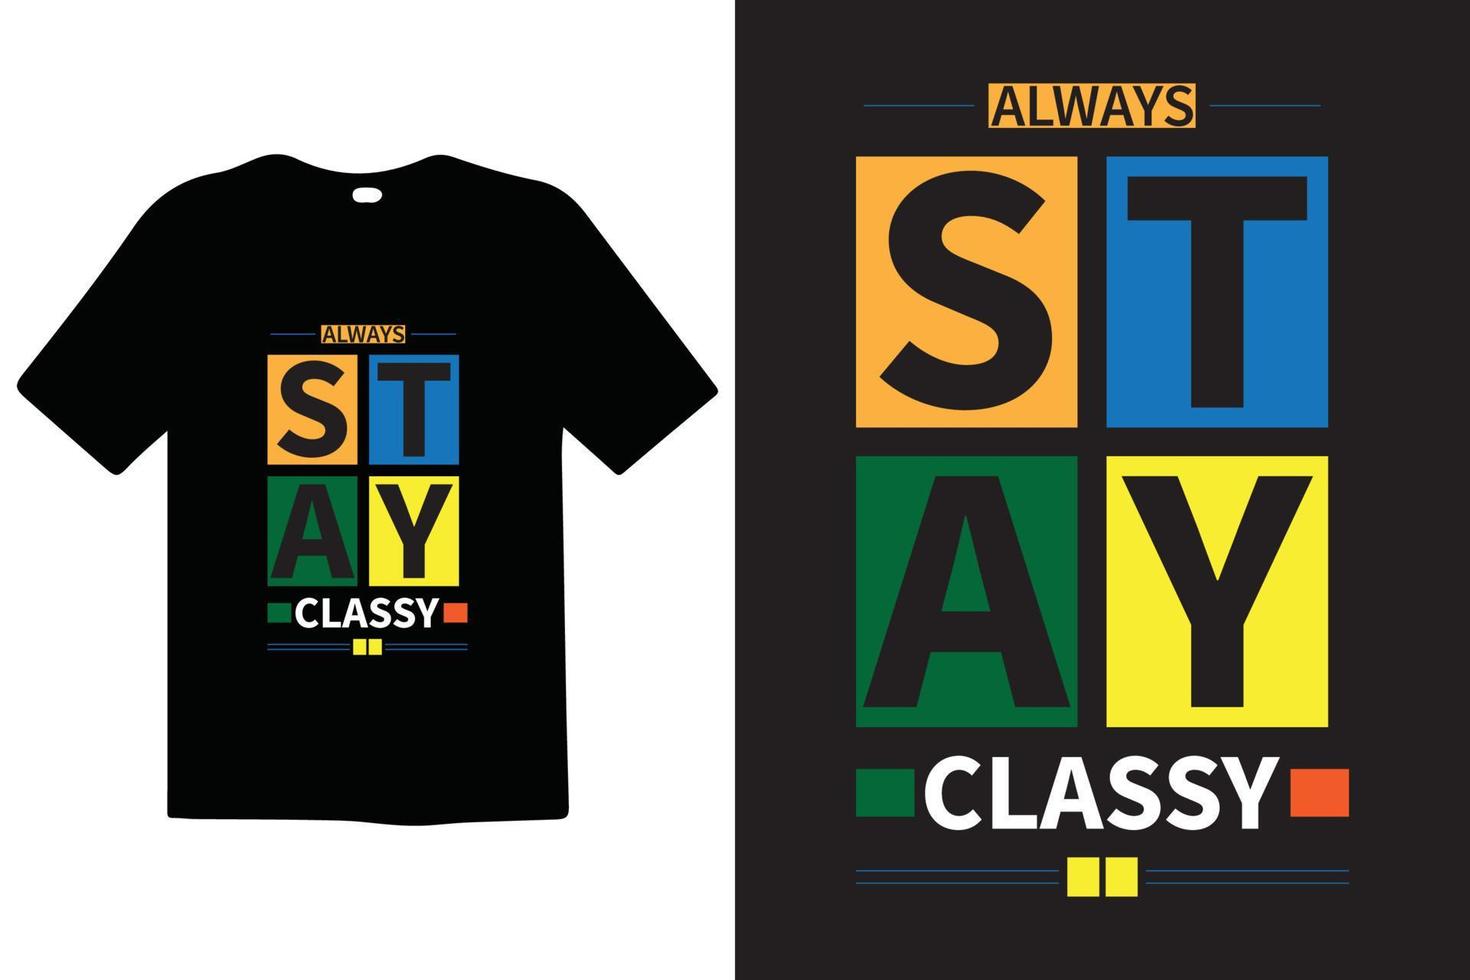 Always Stay Classy typography lettering quotes. T-shirt design. Inspirational and motivational words Ready to print. Stylish t-shirt and apparel trendy design print, vector illustration. Global swatch